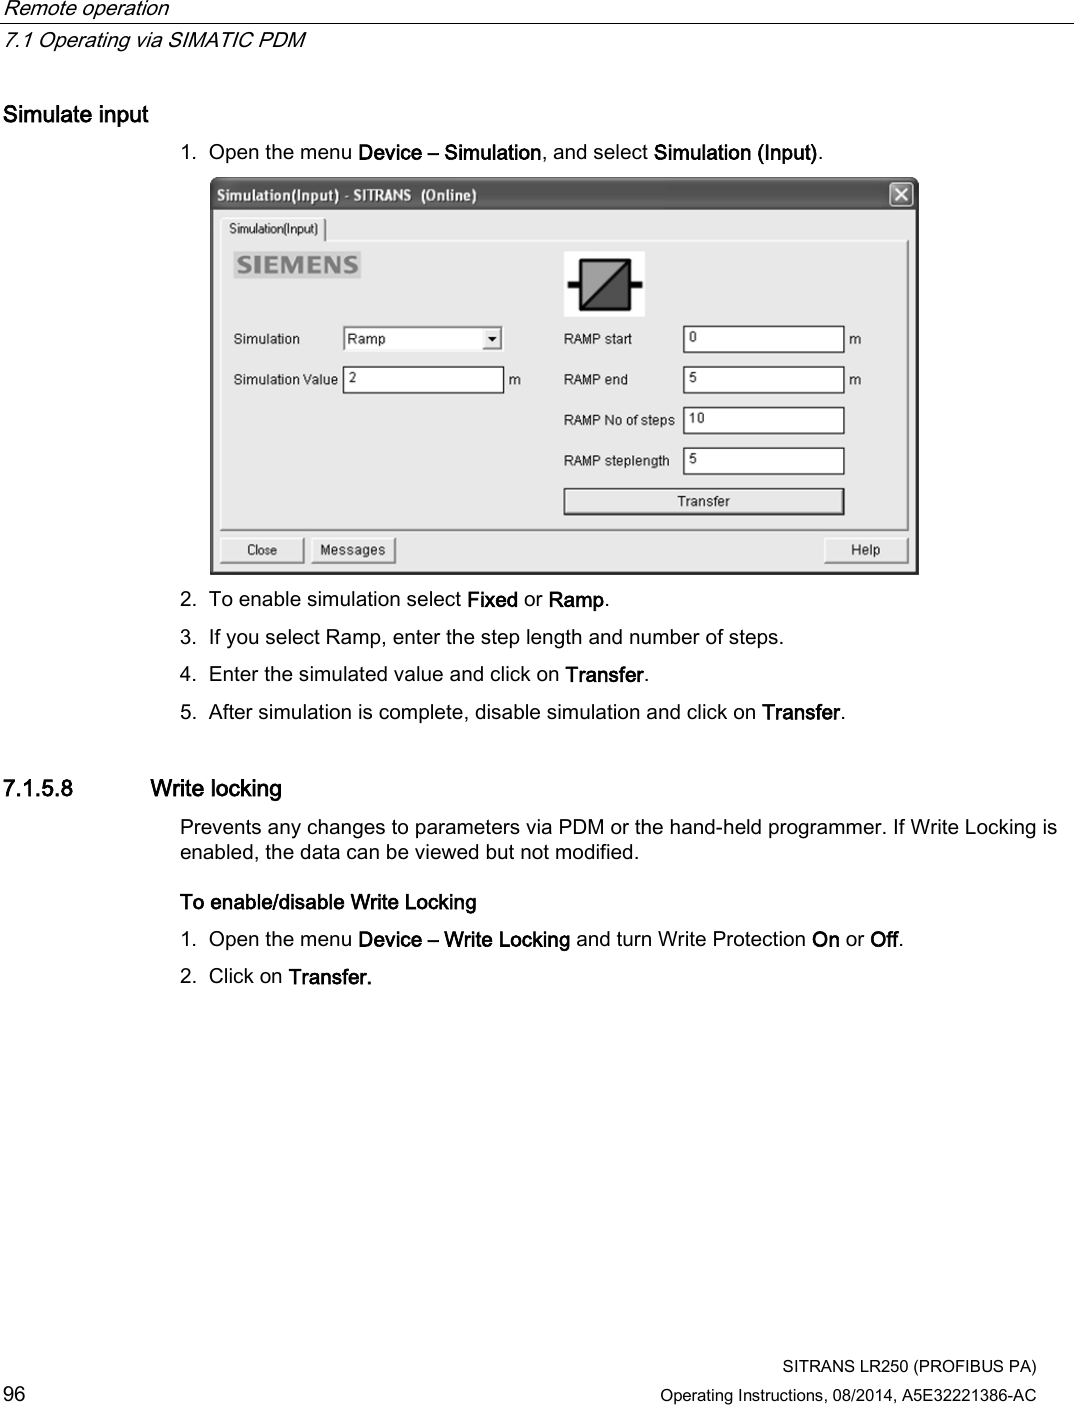 Remote operation   7.1 Operating via SIMATIC PDM  SITRANS LR250 (PROFIBUS PA) 96 Operating Instructions, 08/2014, A5E32221386-AC Simulate input 1. Open the menu Device – Simulation, and select Simulation (Input).  2. To enable simulation select Fixed or Ramp. 3. If you select Ramp, enter the step length and number of steps. 4. Enter the simulated value and click on Transfer. 5. After simulation is complete, disable simulation and click on Transfer. 7.1.5.8 Write locking Prevents any changes to parameters via PDM or the hand-held programmer. If Write Locking is enabled, the data can be viewed but not modified. To enable/disable Write Locking 1. Open the menu Device – Write Locking and turn Write Protection On or Off. 2. Click on Transfer. 